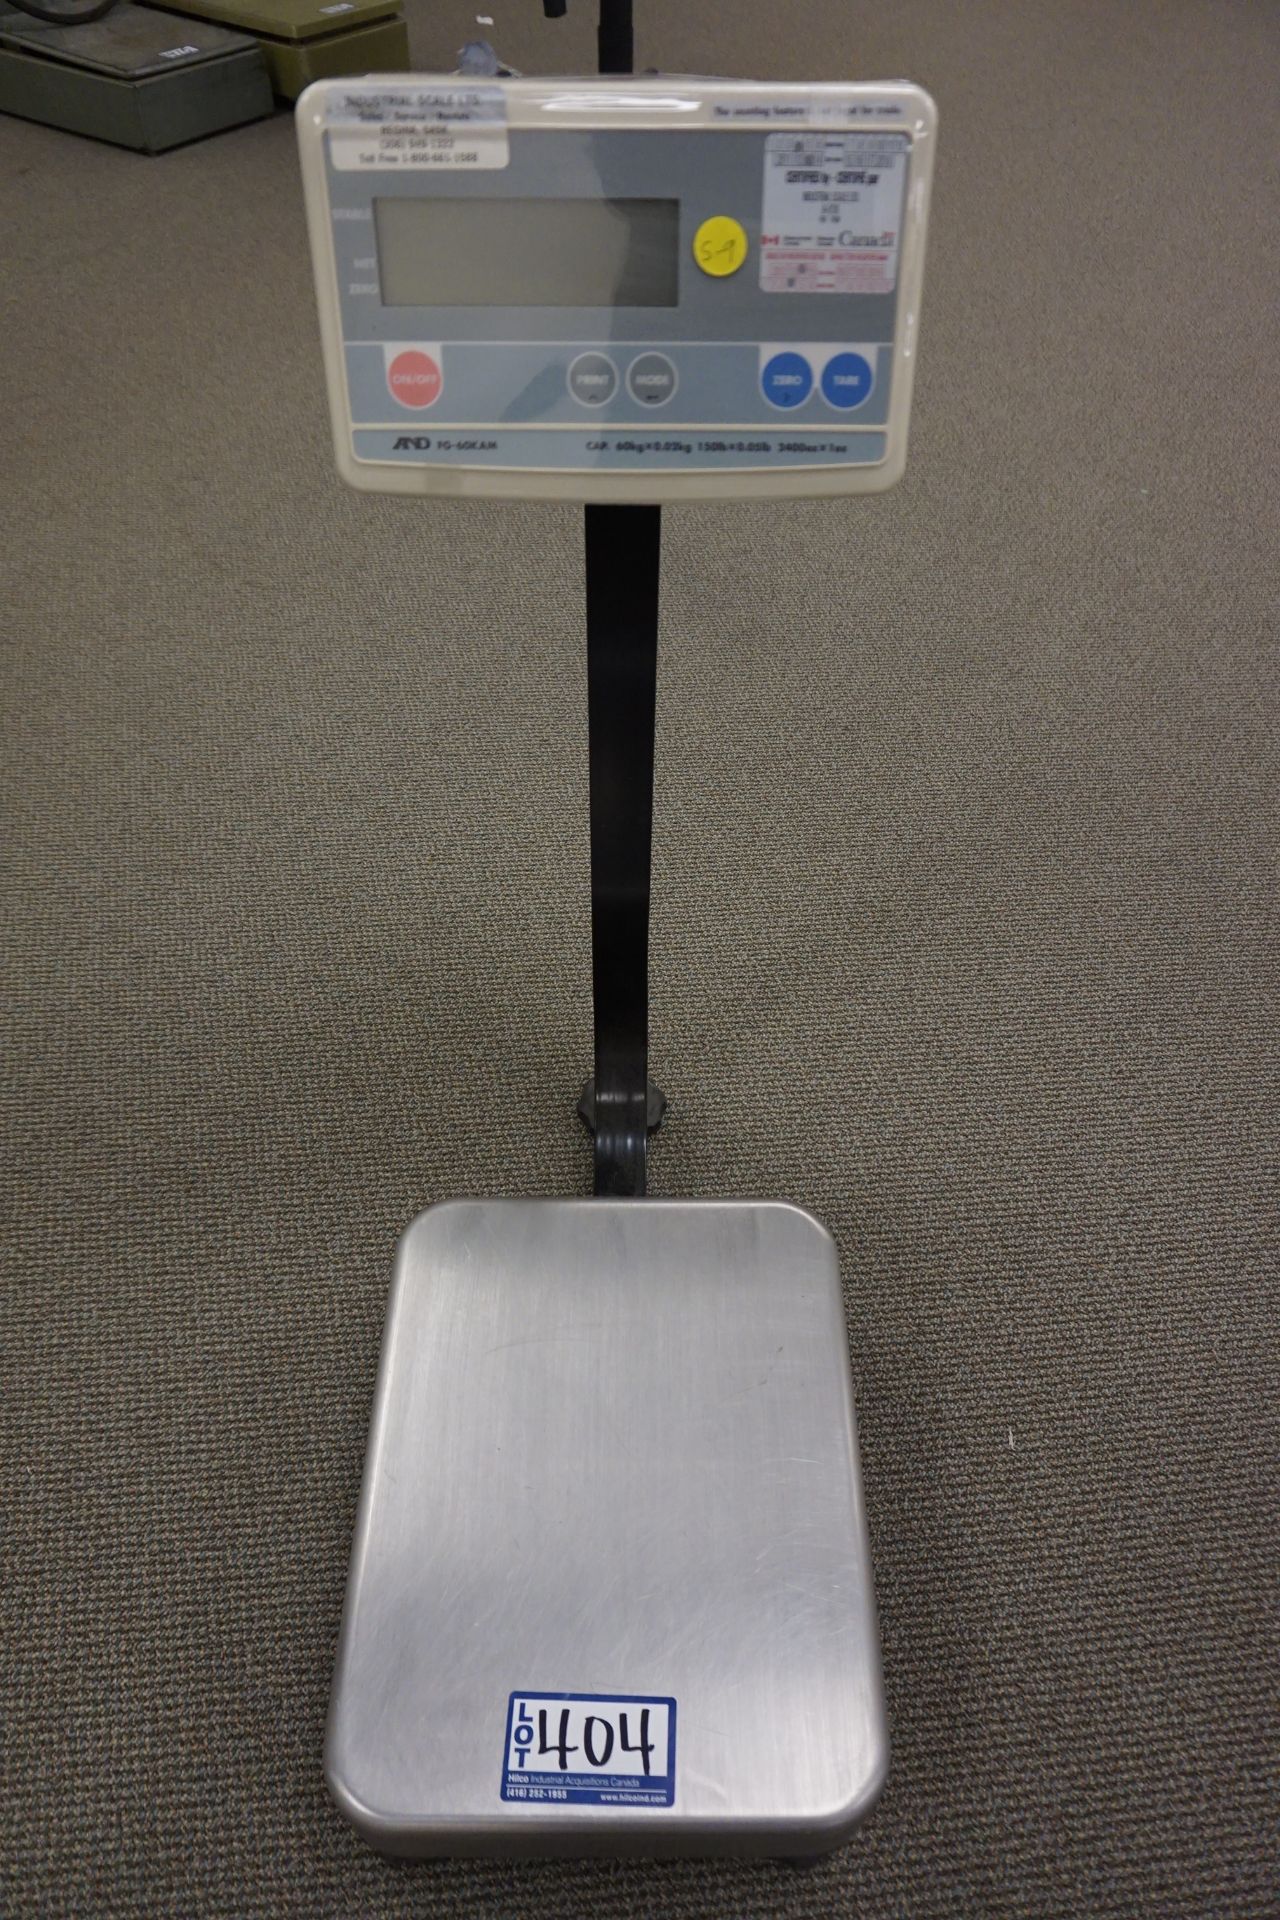 AND Model FG-60 KAM 150-Lbs Capacity Scale